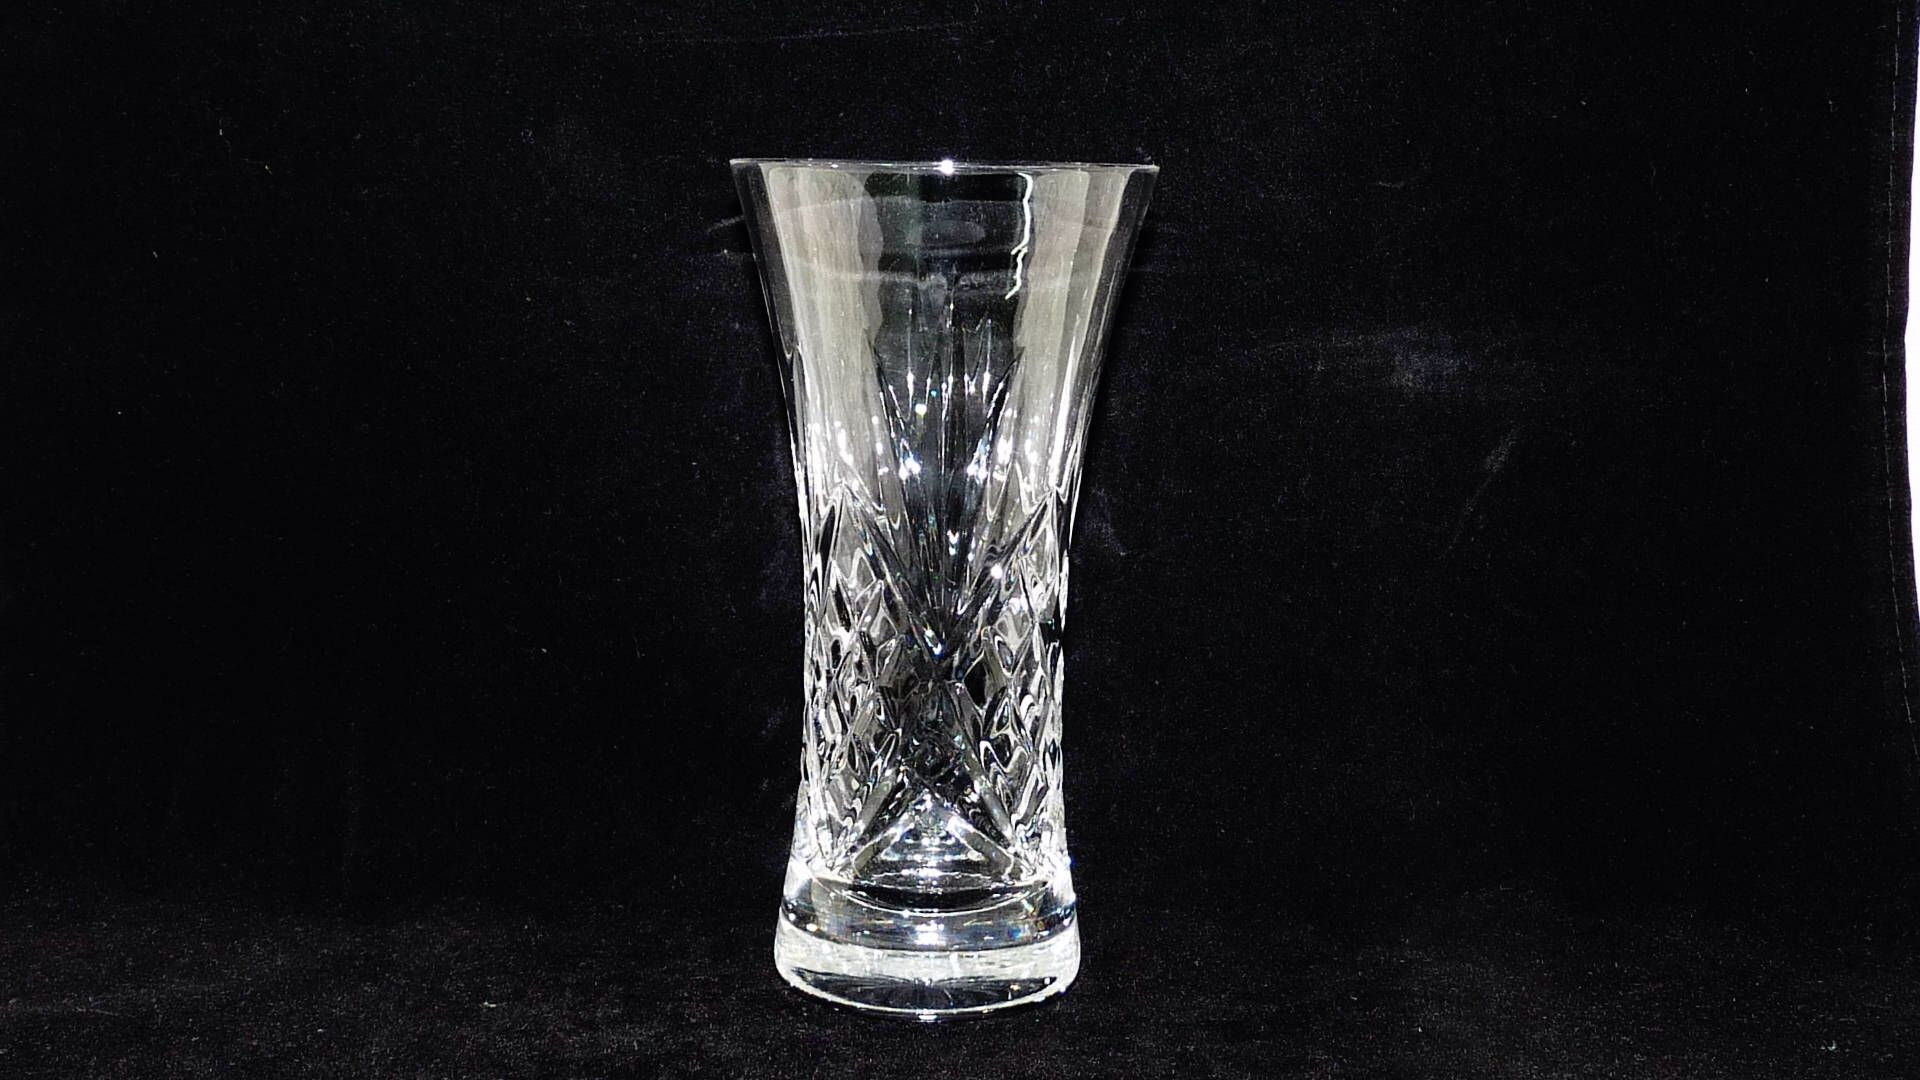 16 Lovely Cristal D Arques Lead Crystal Vase 2024 free download cristal d arques lead crystal vase of a personal favourite from my etsy shop https www etsy com uk inside a personal favourite from my etsy shop https www etsy com uk listing 488677742 germa